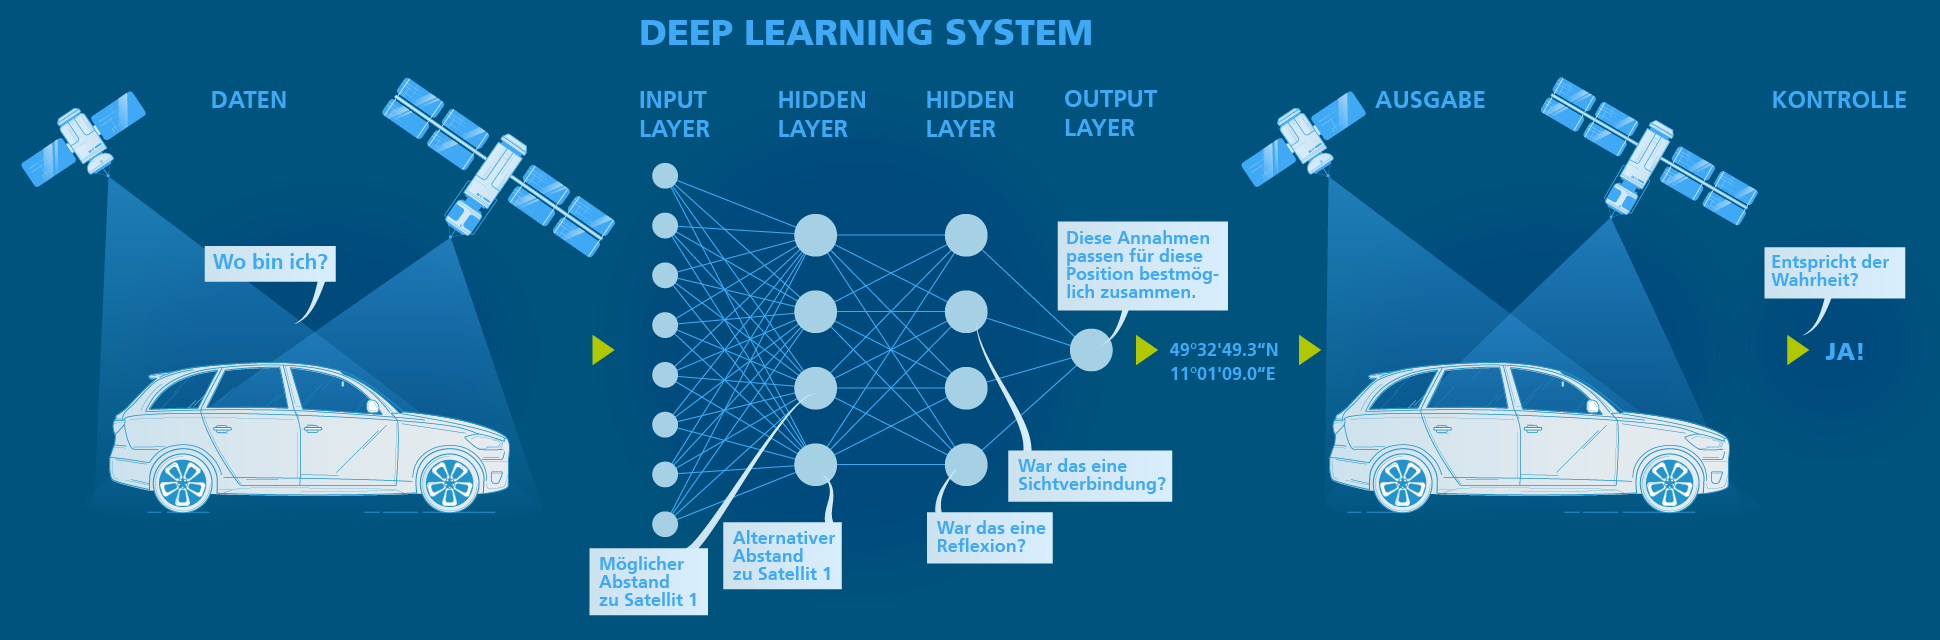 Deep-Learning-System